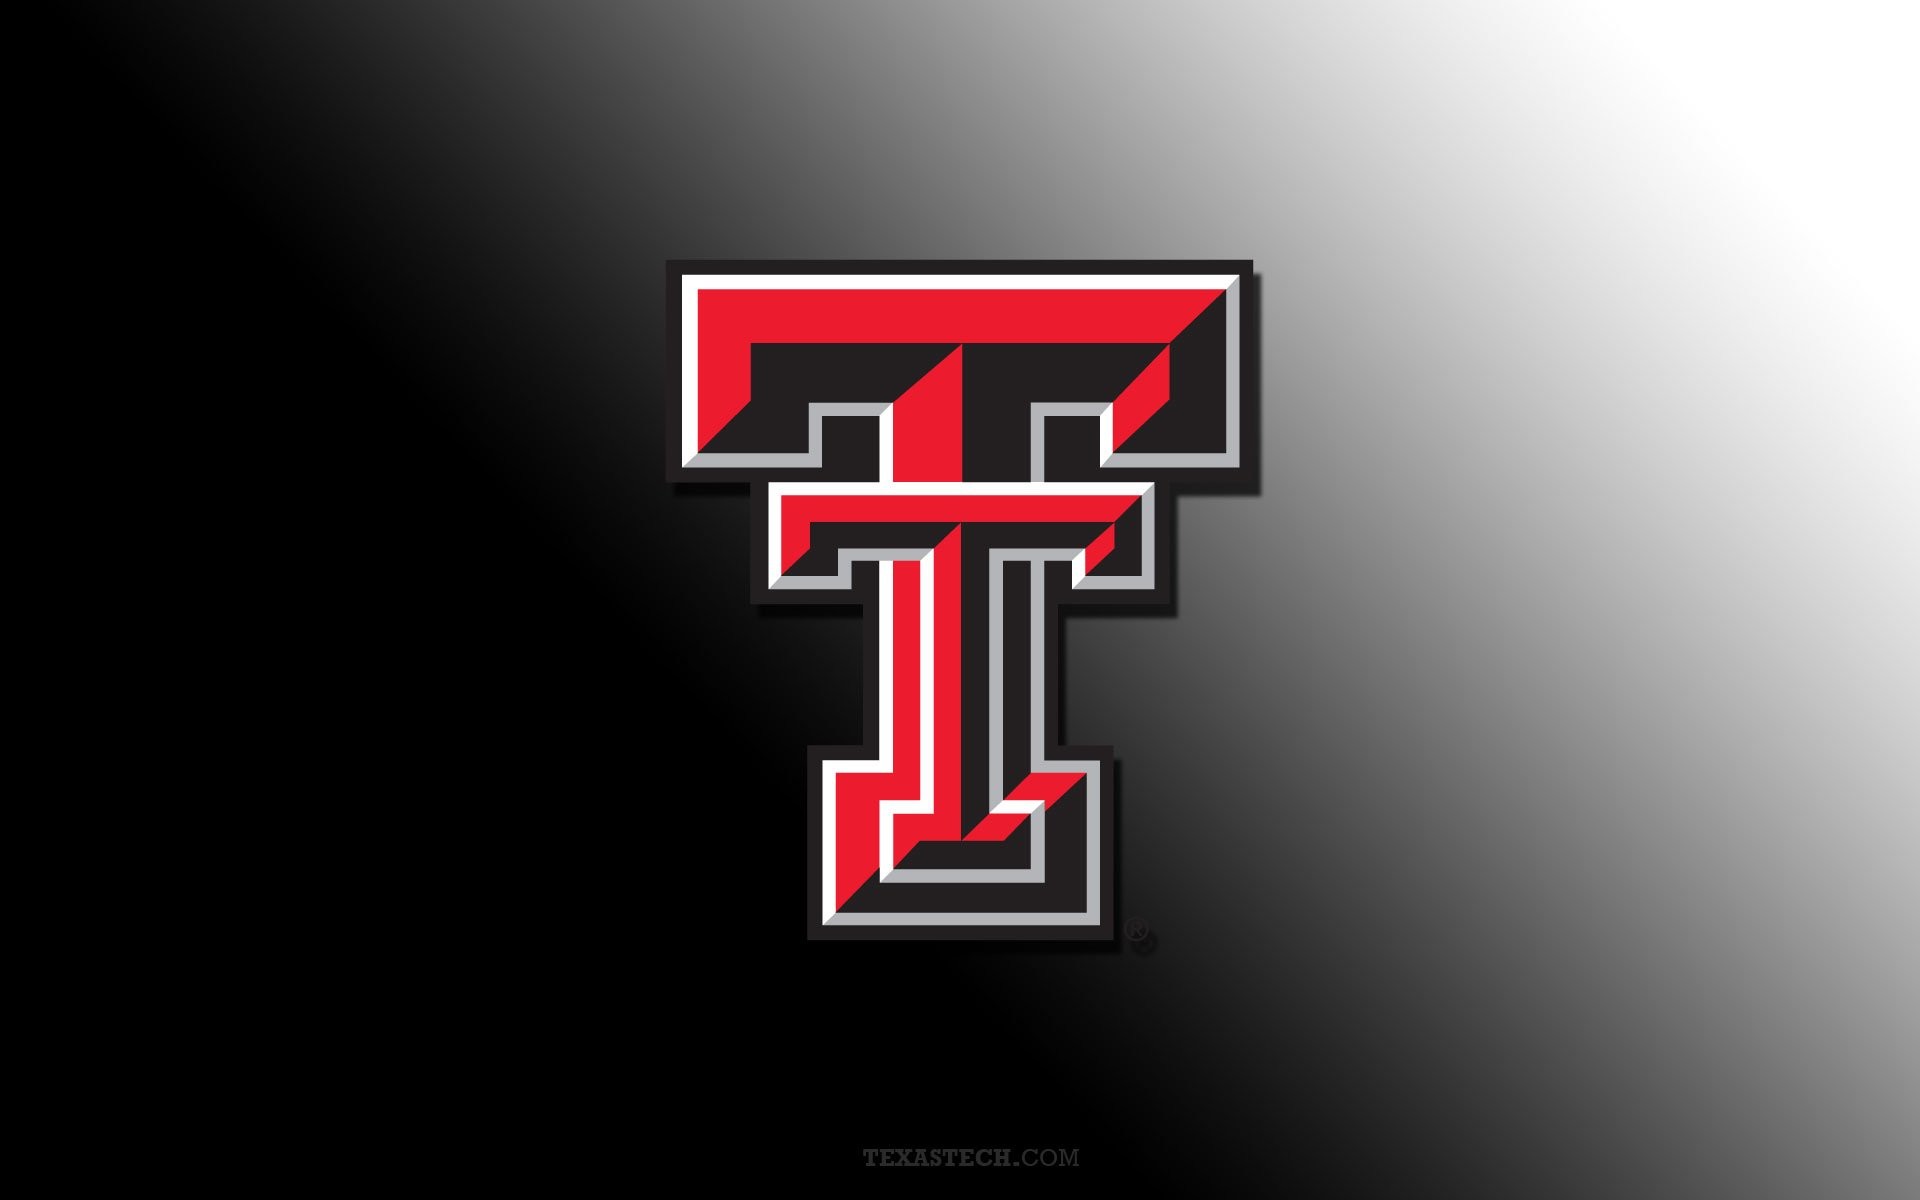 1920x1200 15 Texas Tech Wallpapers Free in High-Quality | WallInsider.com